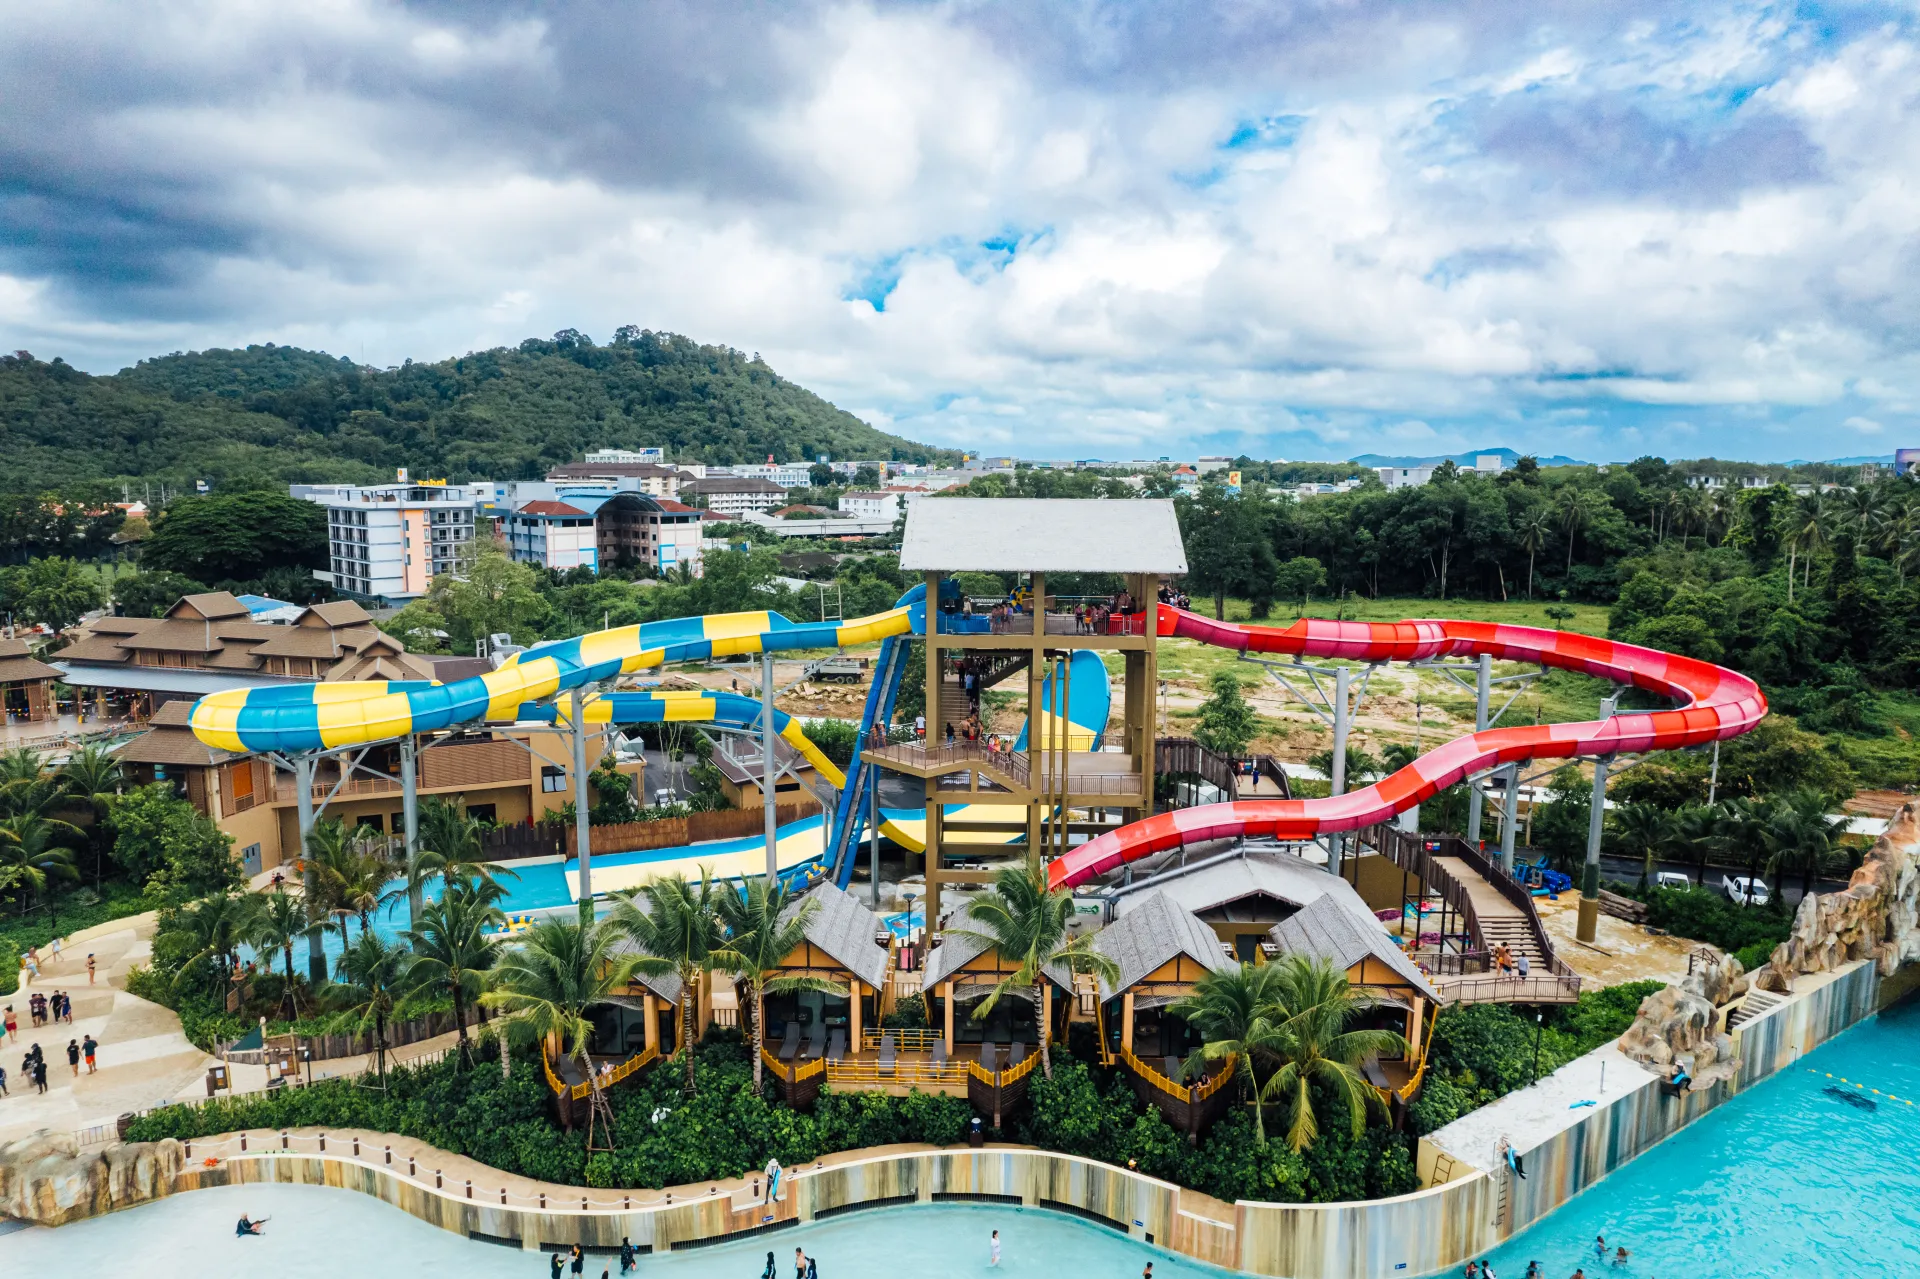 Enjoy gravity-defying amusement rides at our water park